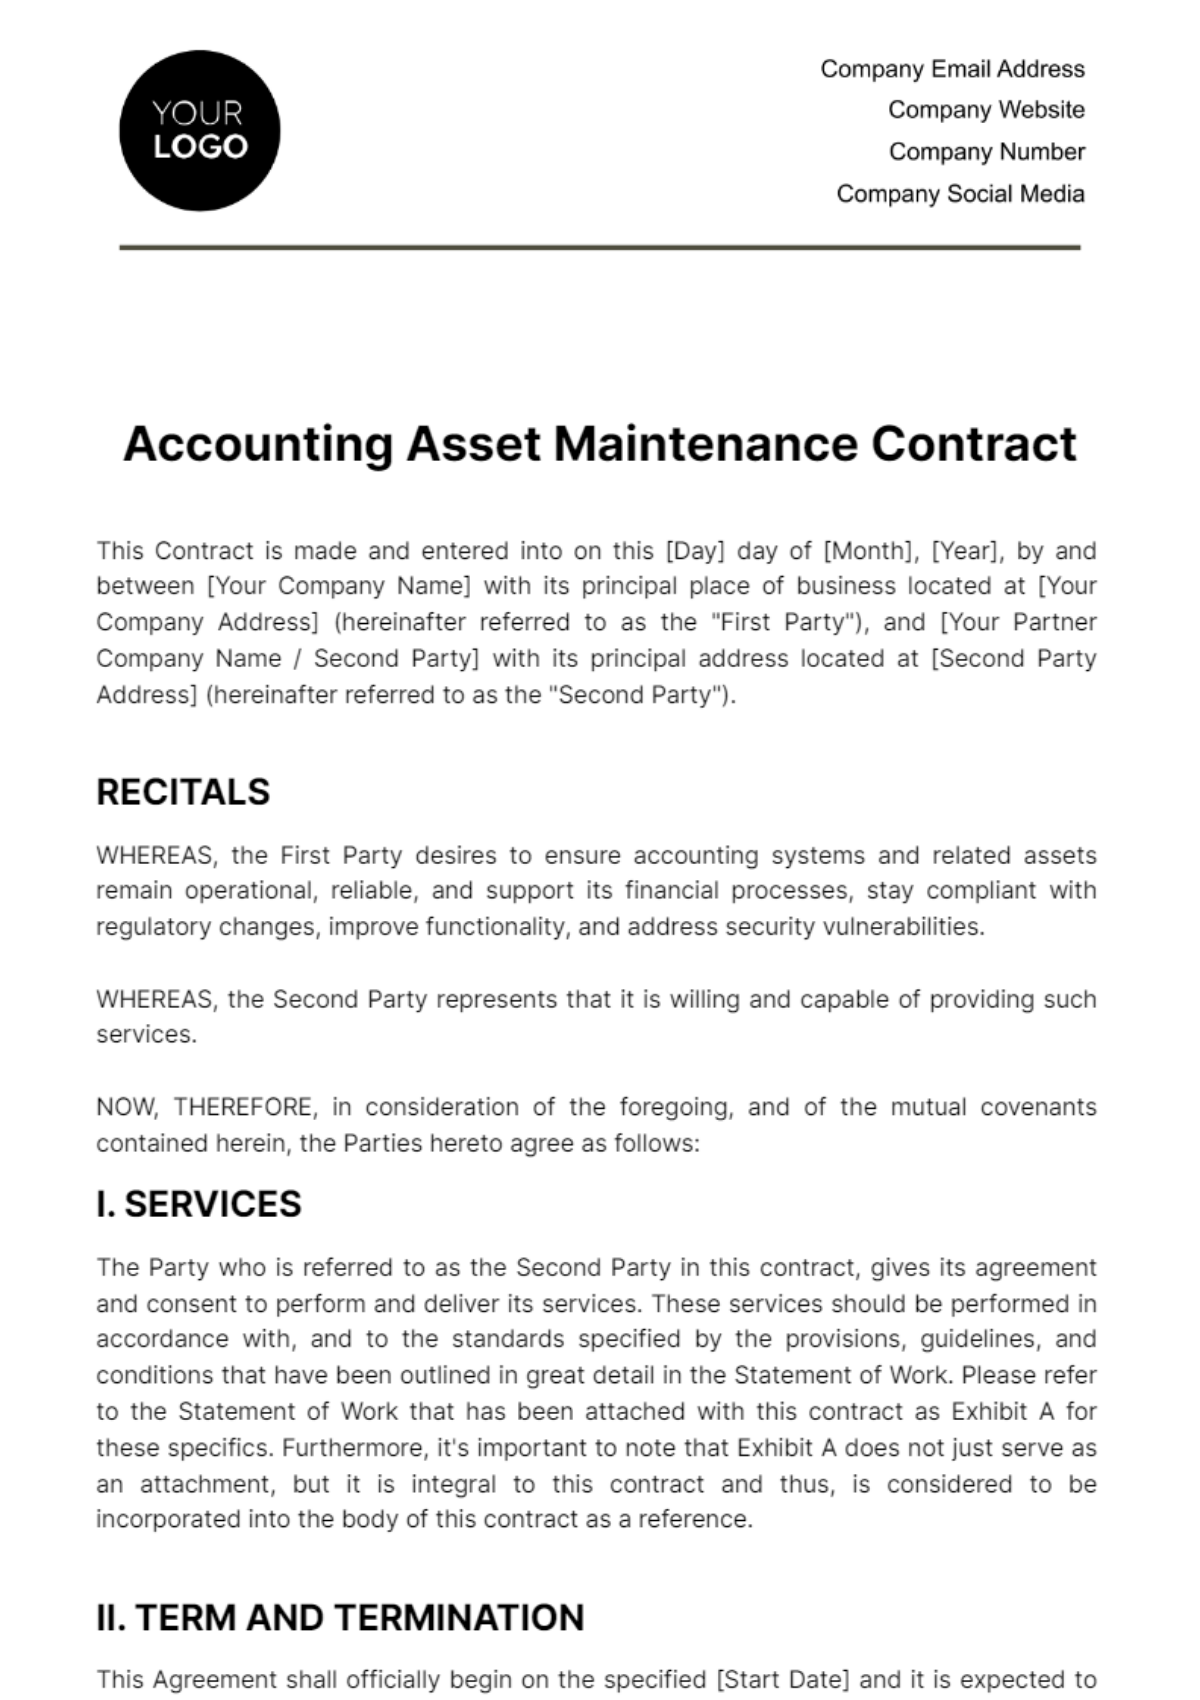 Accounting Asset Maintenance Contract Template